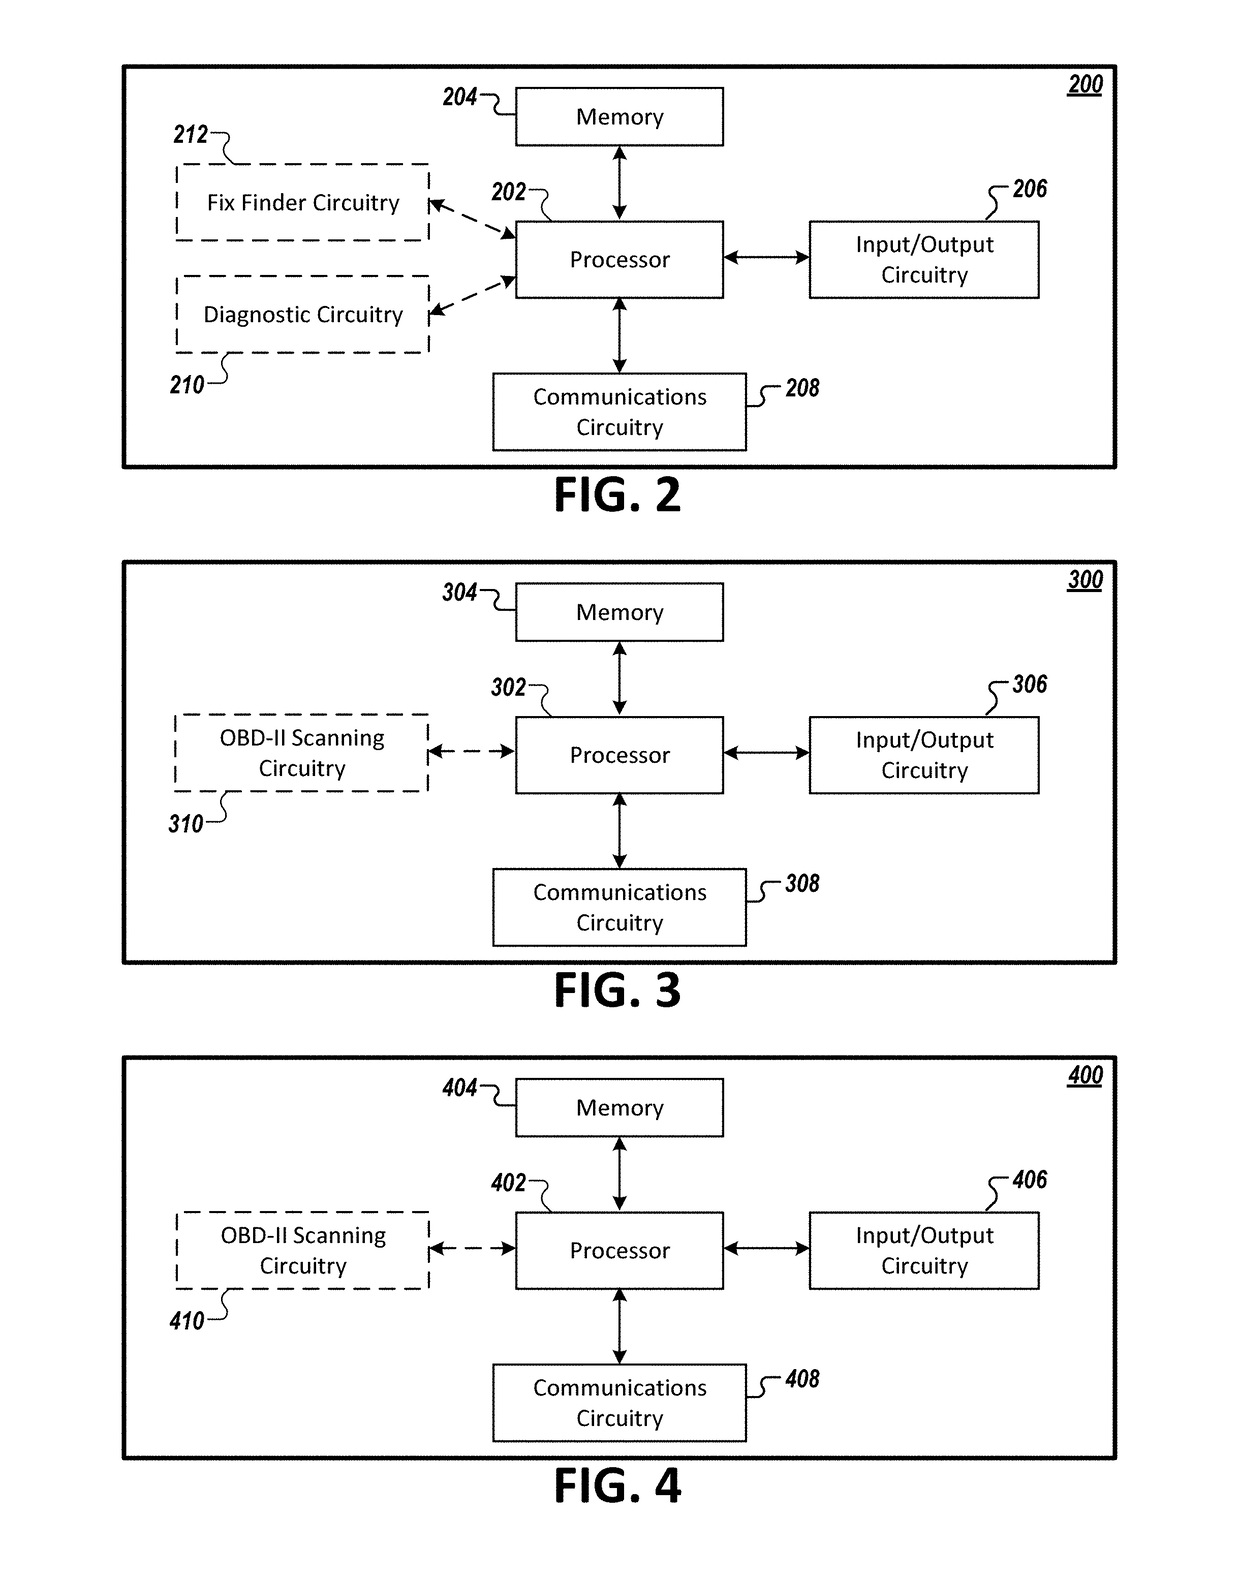 Systems and apparatuses facilitating a do-it-yourself experience-based repair solution